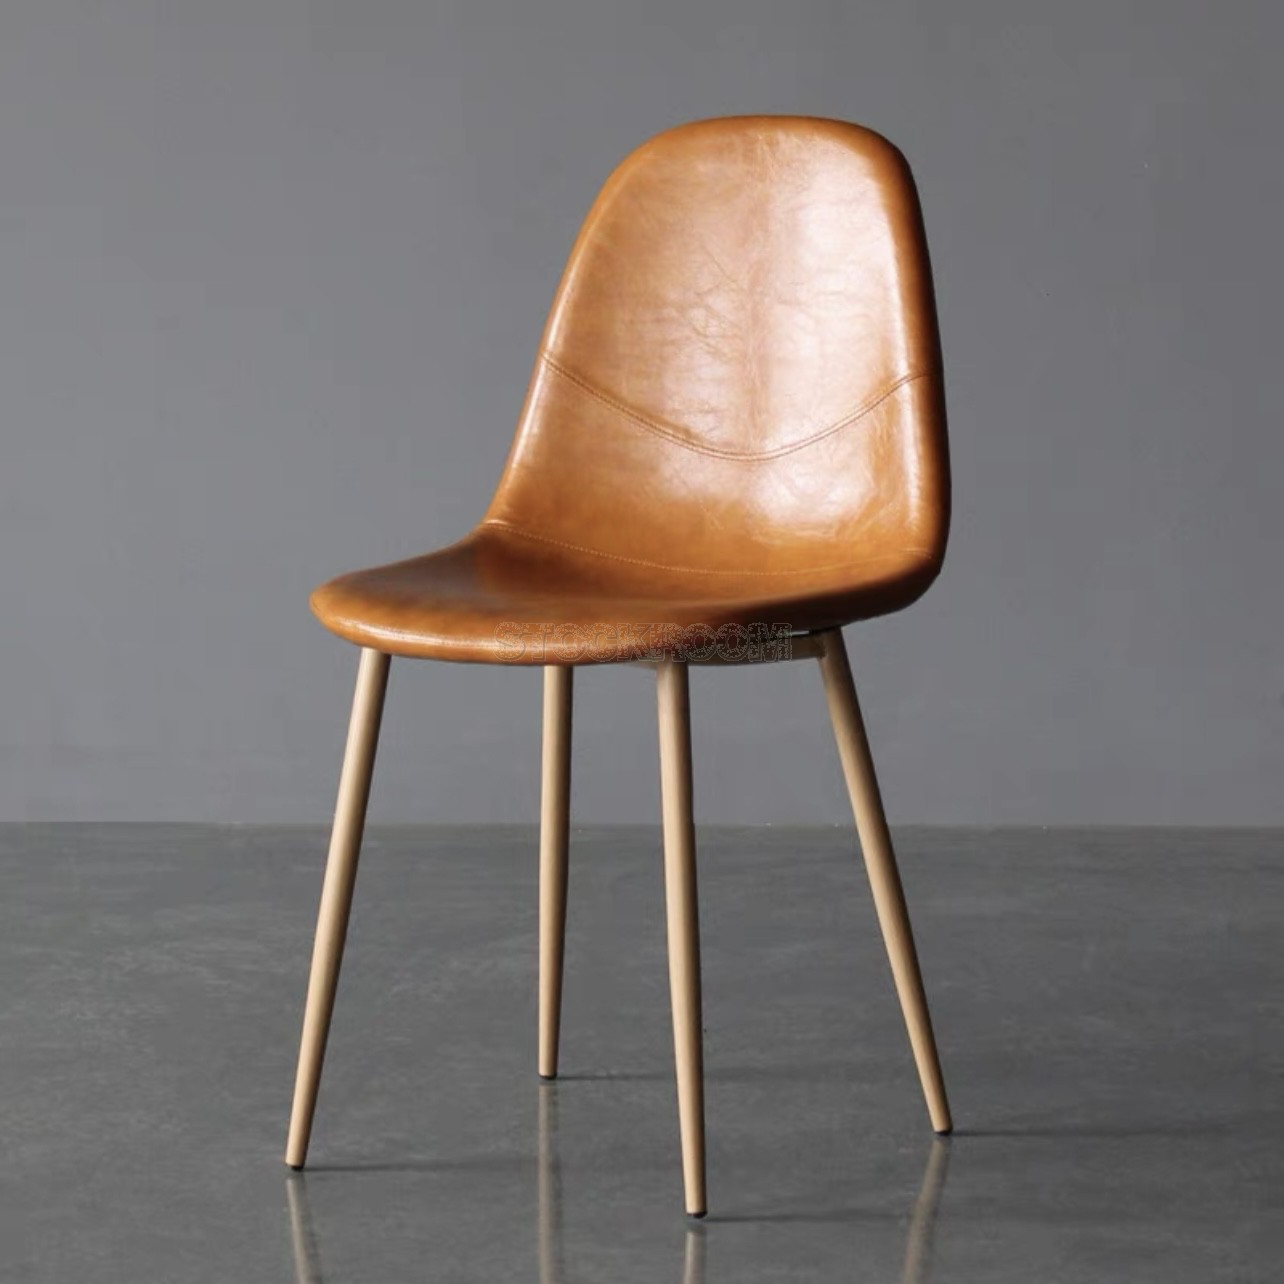 Ravenna PU Leather Upholstered Dining Chair